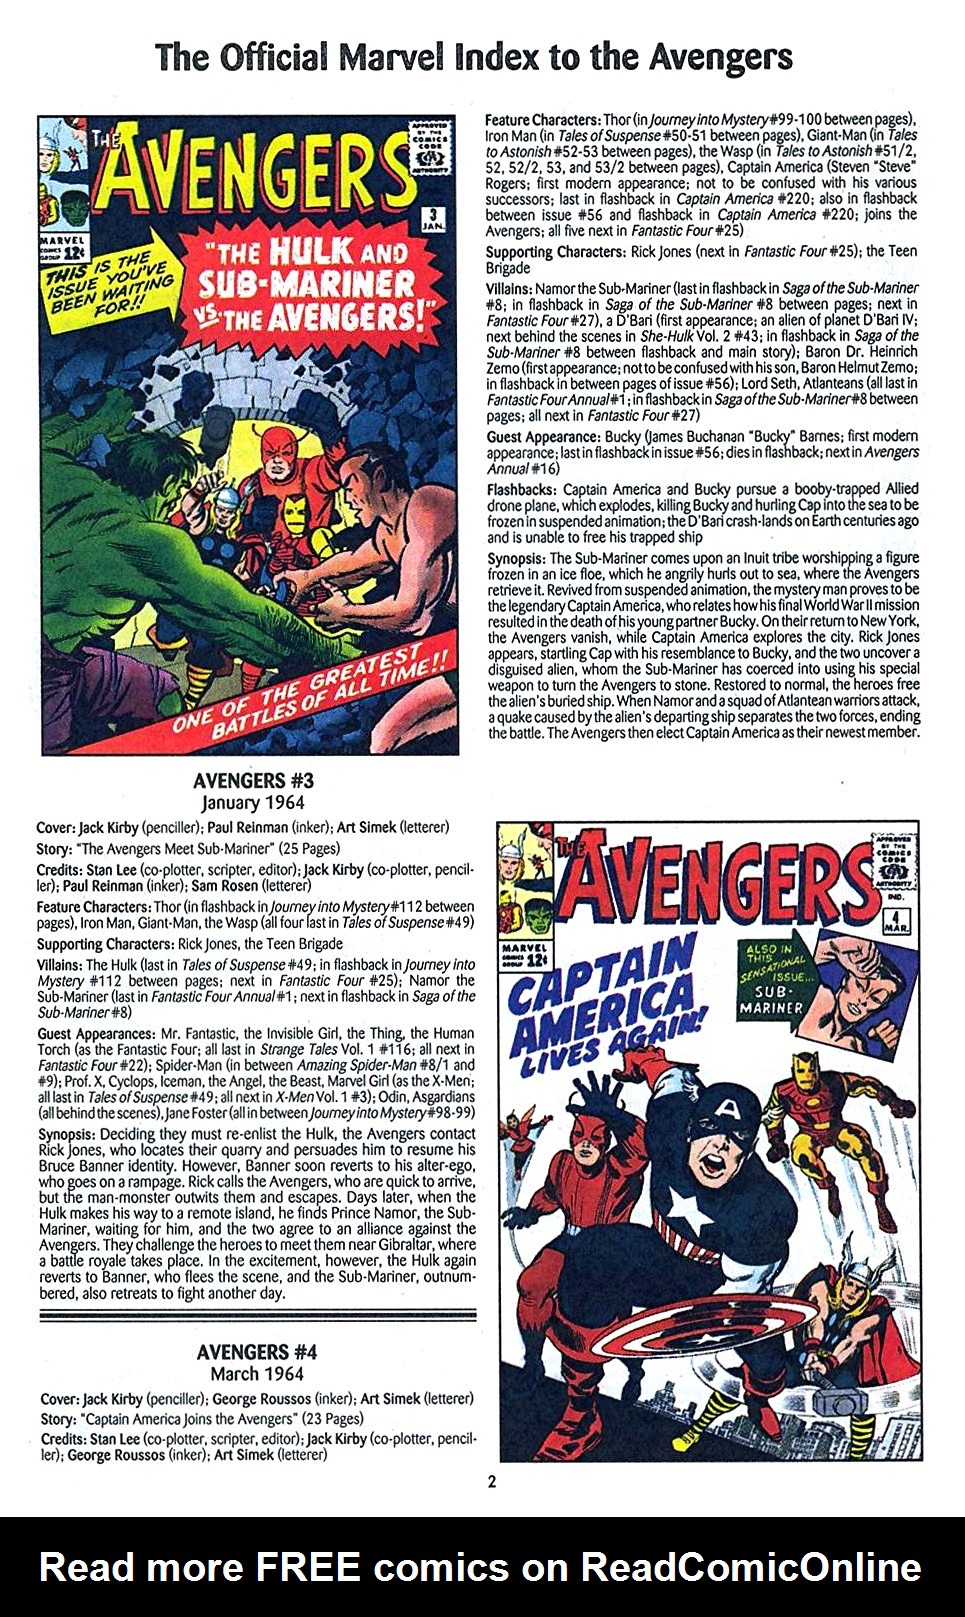 Read online The Official Marvel Index to the Avengers comic -  Issue #1 - 4